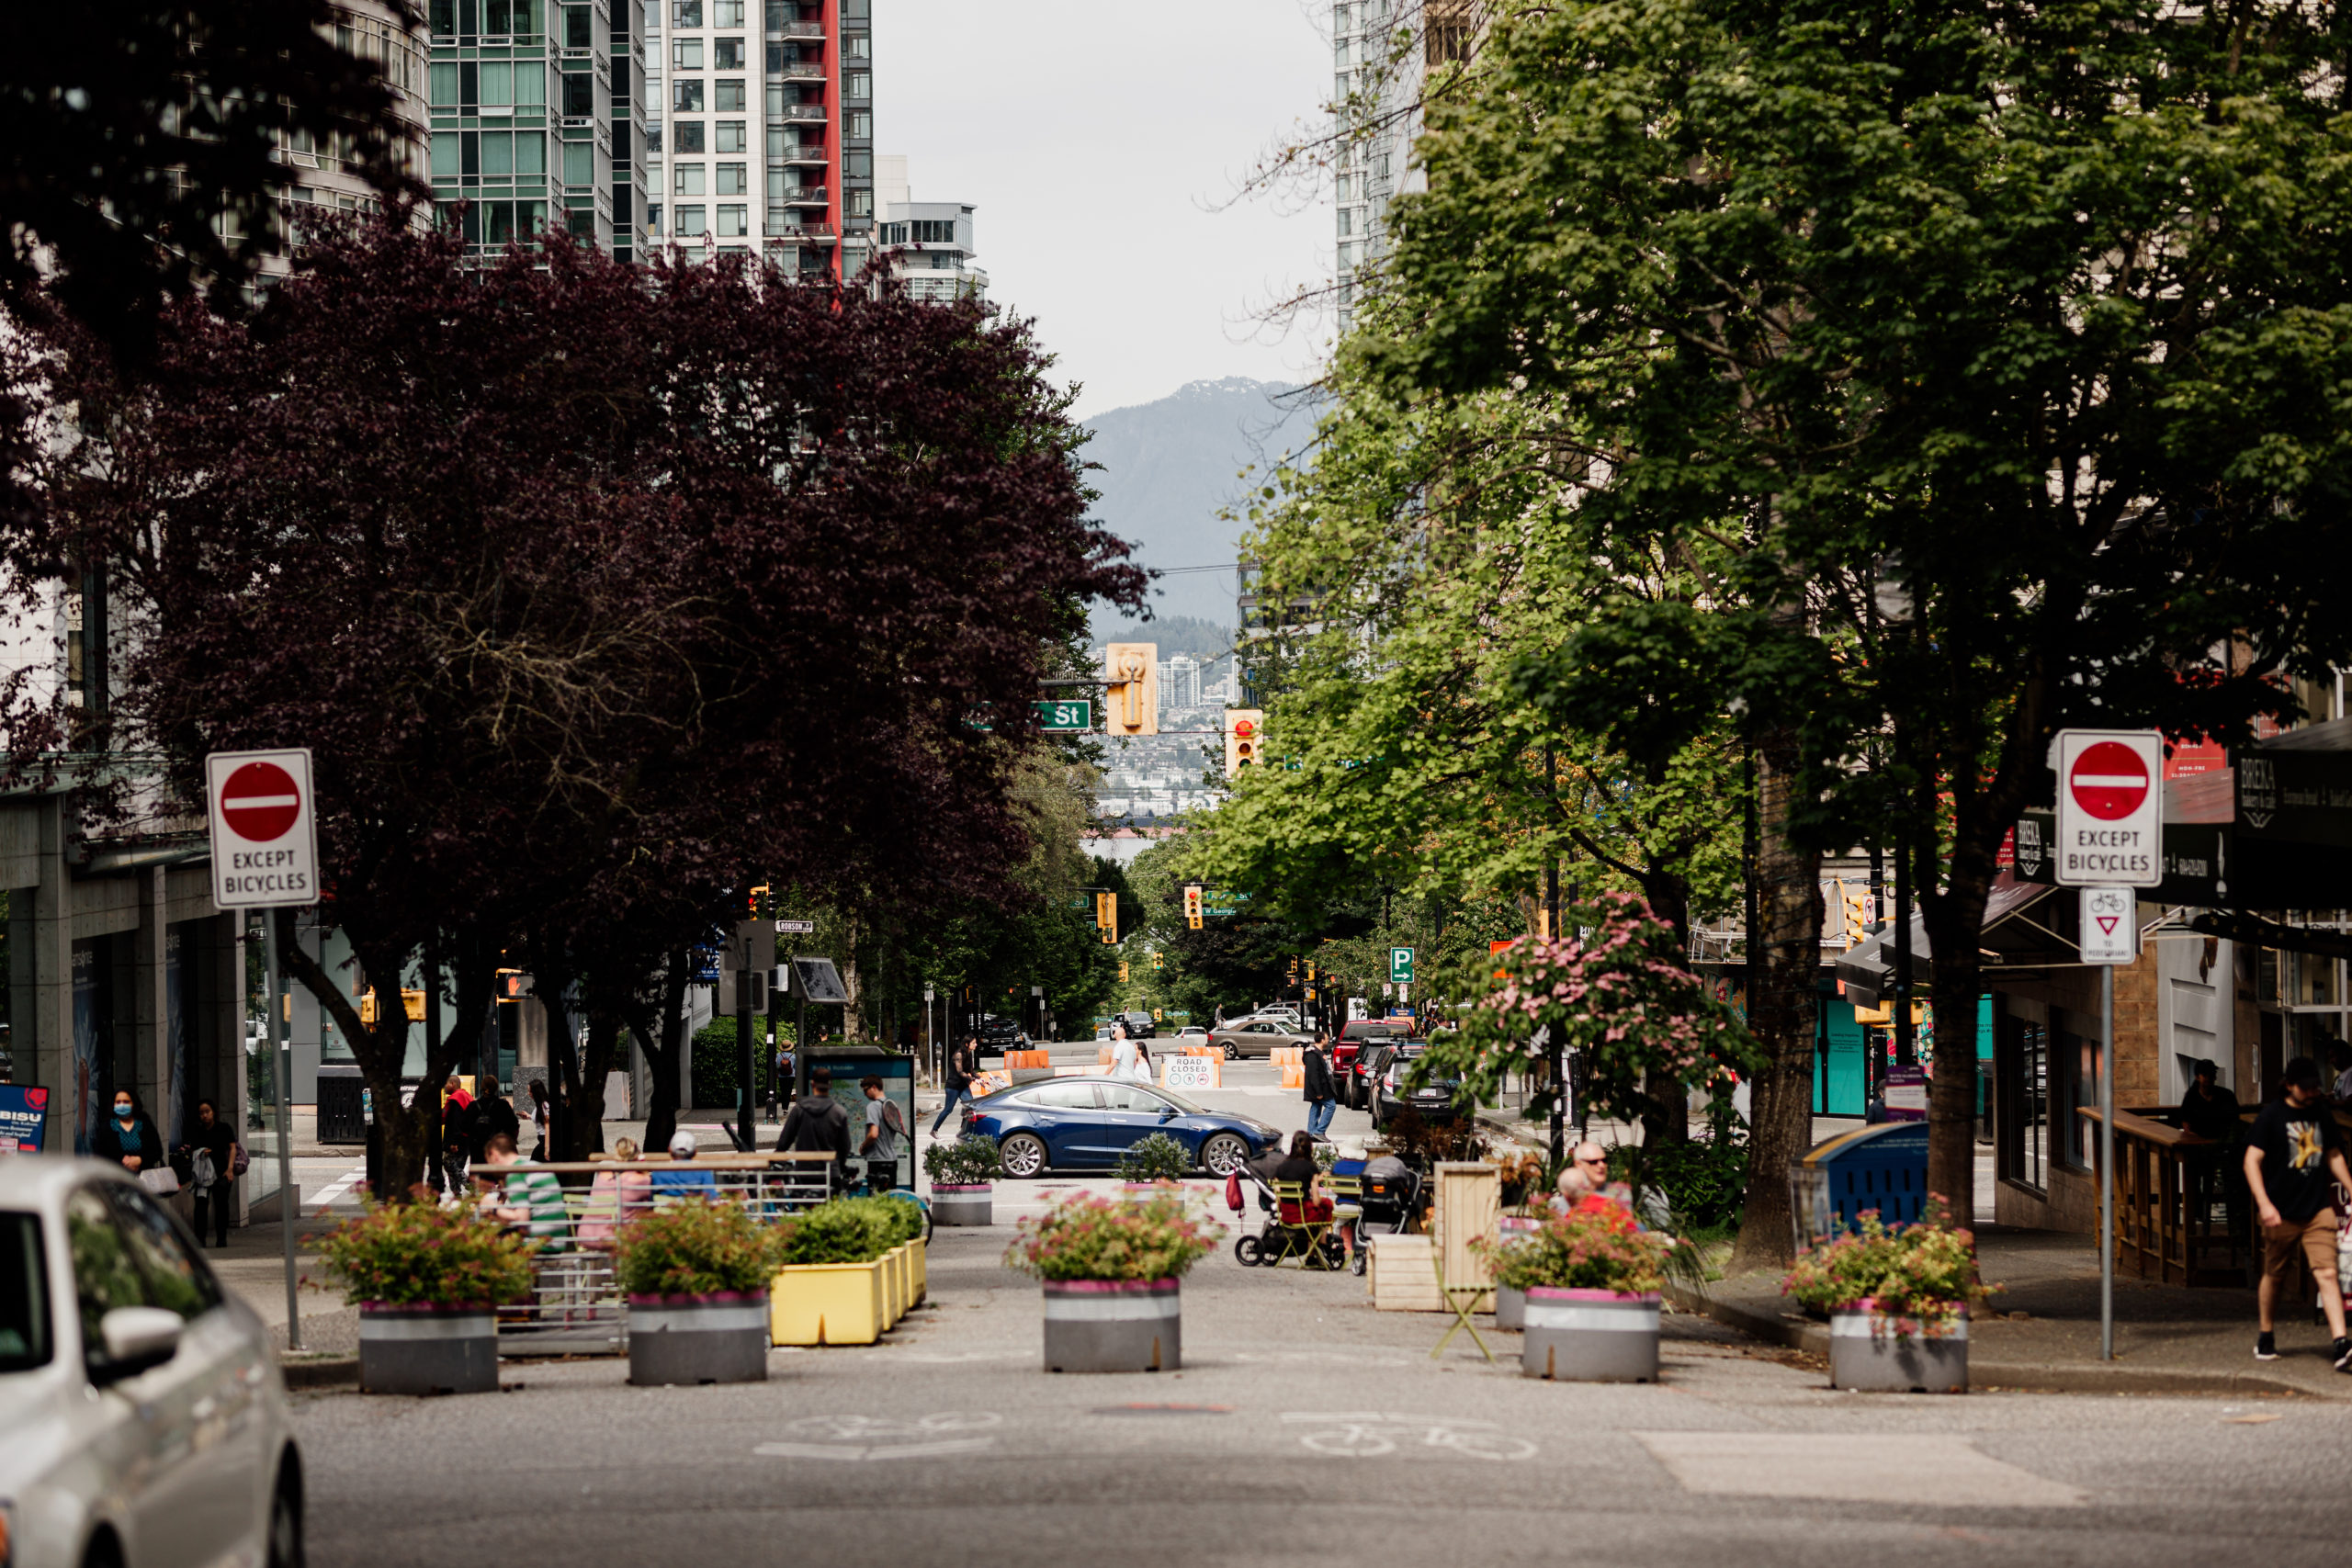 Vancouver Shopping: Best of Summer Sales #onRobson - Robson Street Business  Association